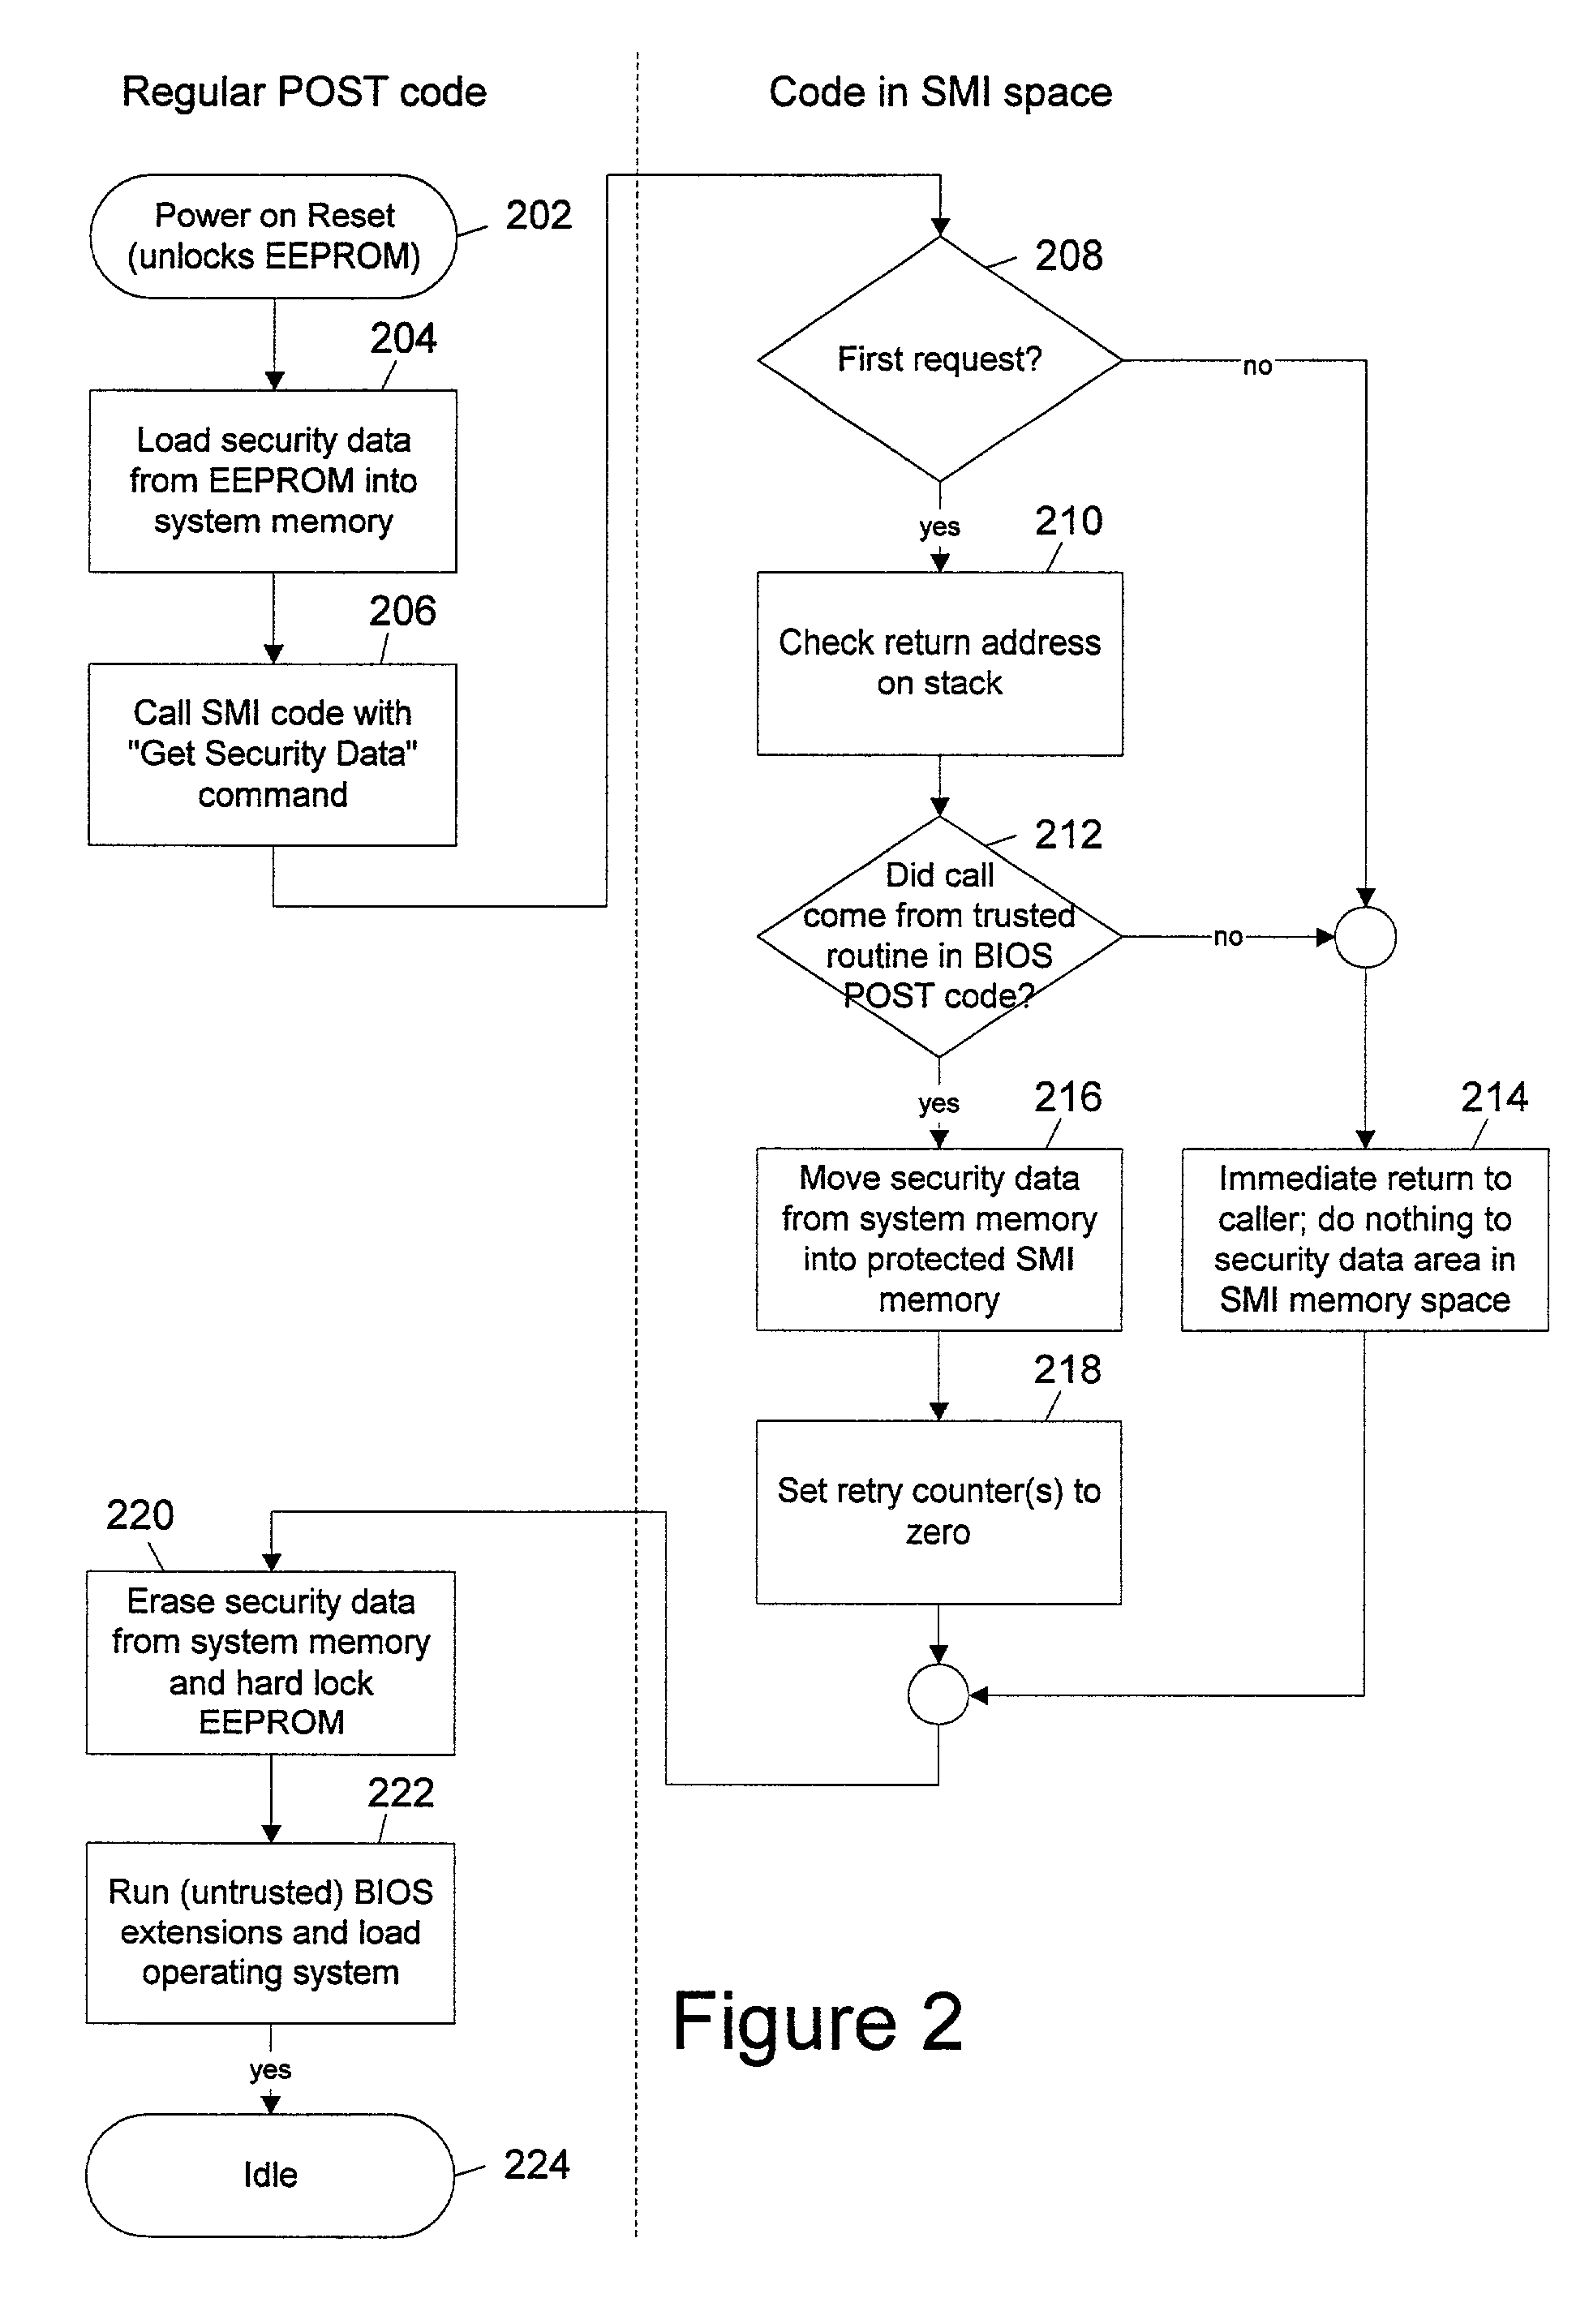 Method to use secure passwords in an unsecure program environment